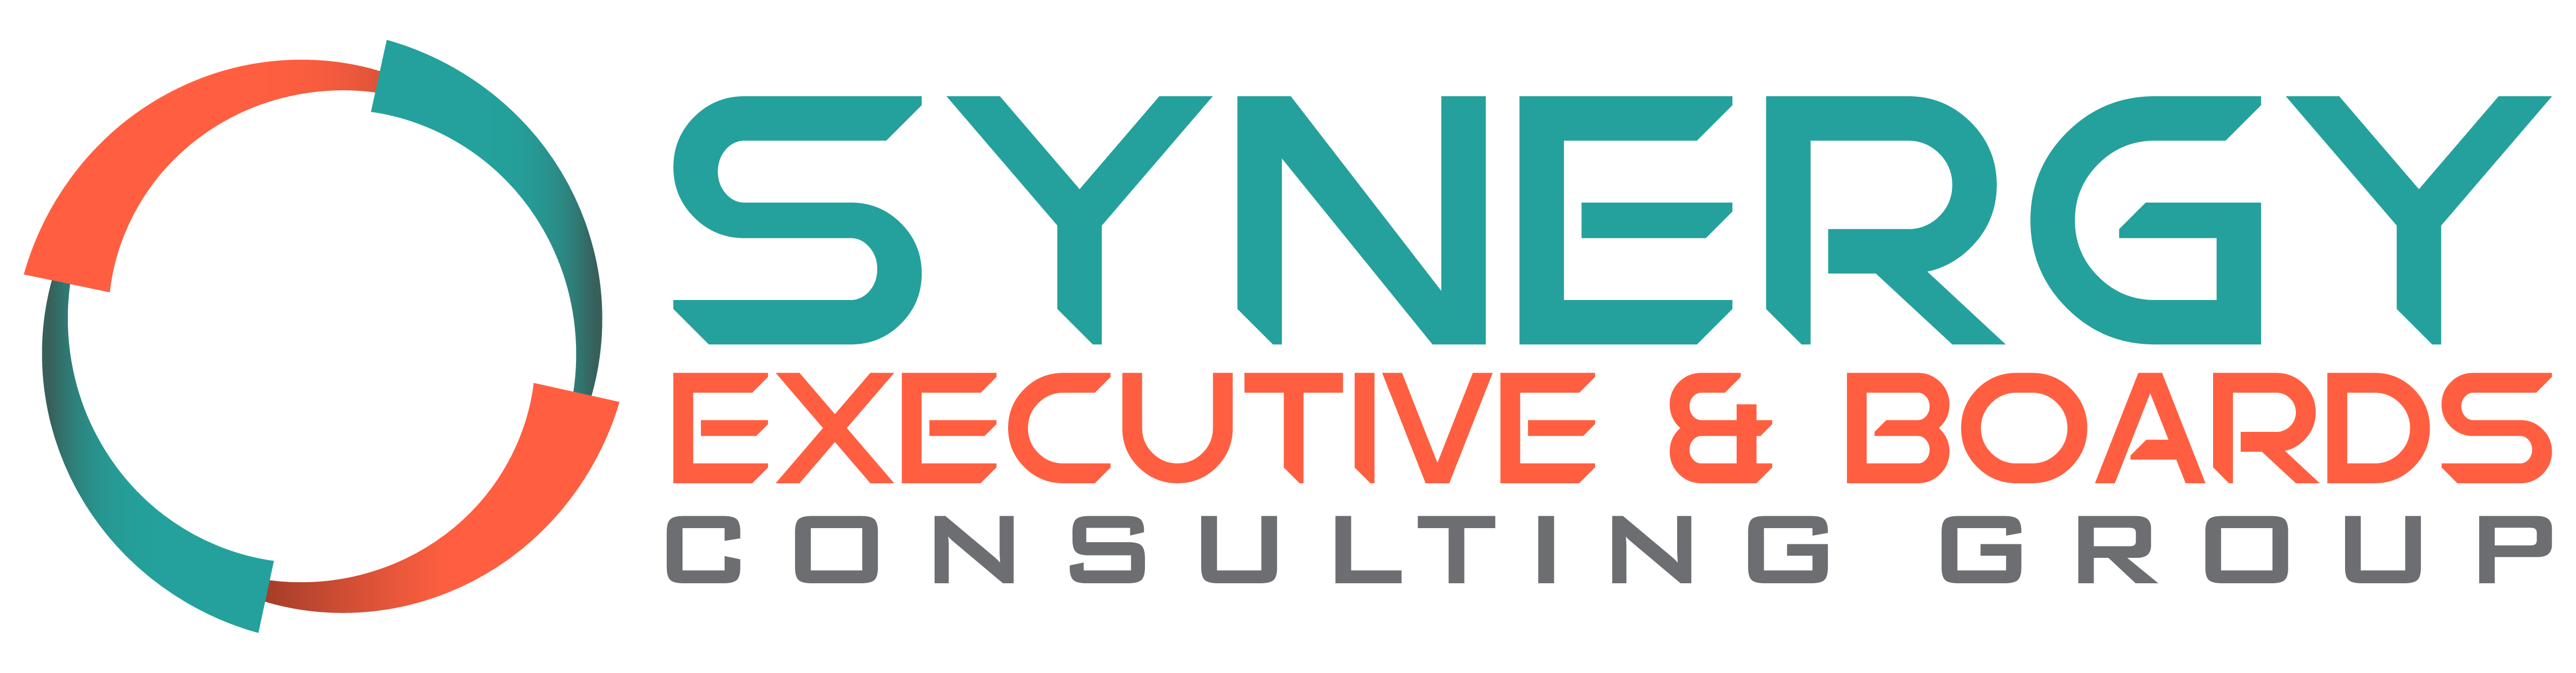 Synergy Executive and Boards Consulting Group